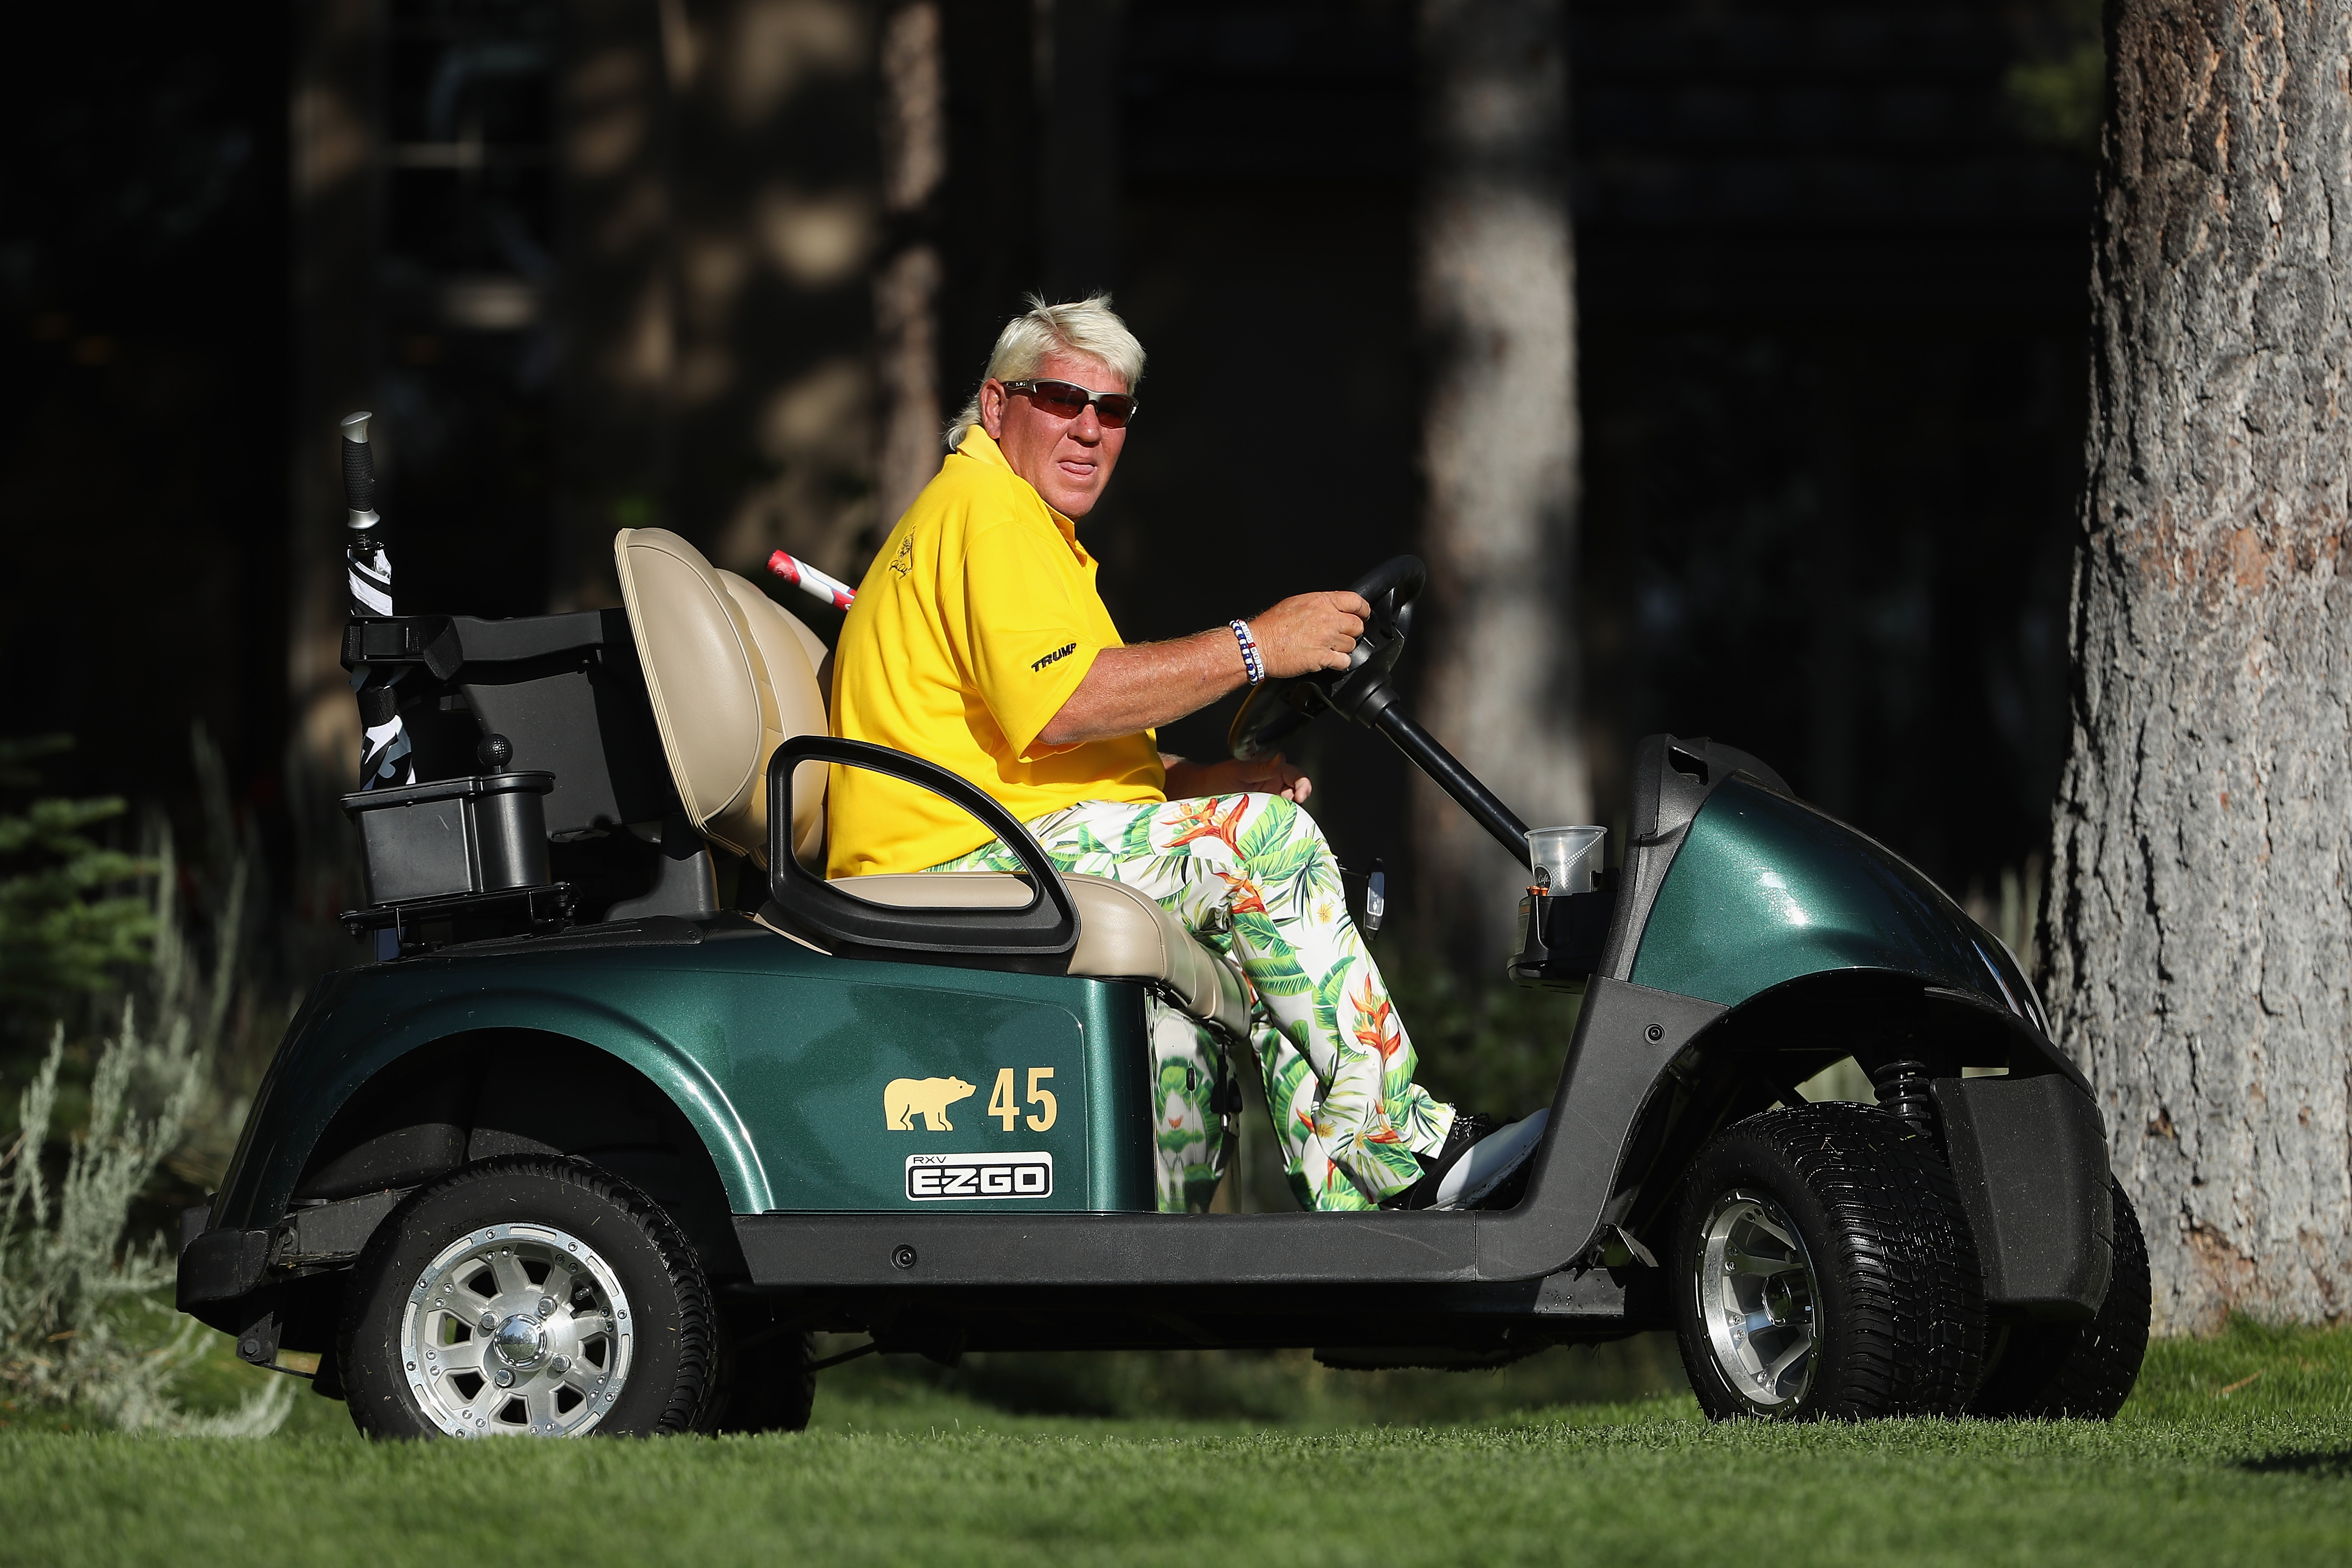 Pga Championship John Daly Withdraws From Pga Championship Golf News And Tour Information Golf Digest